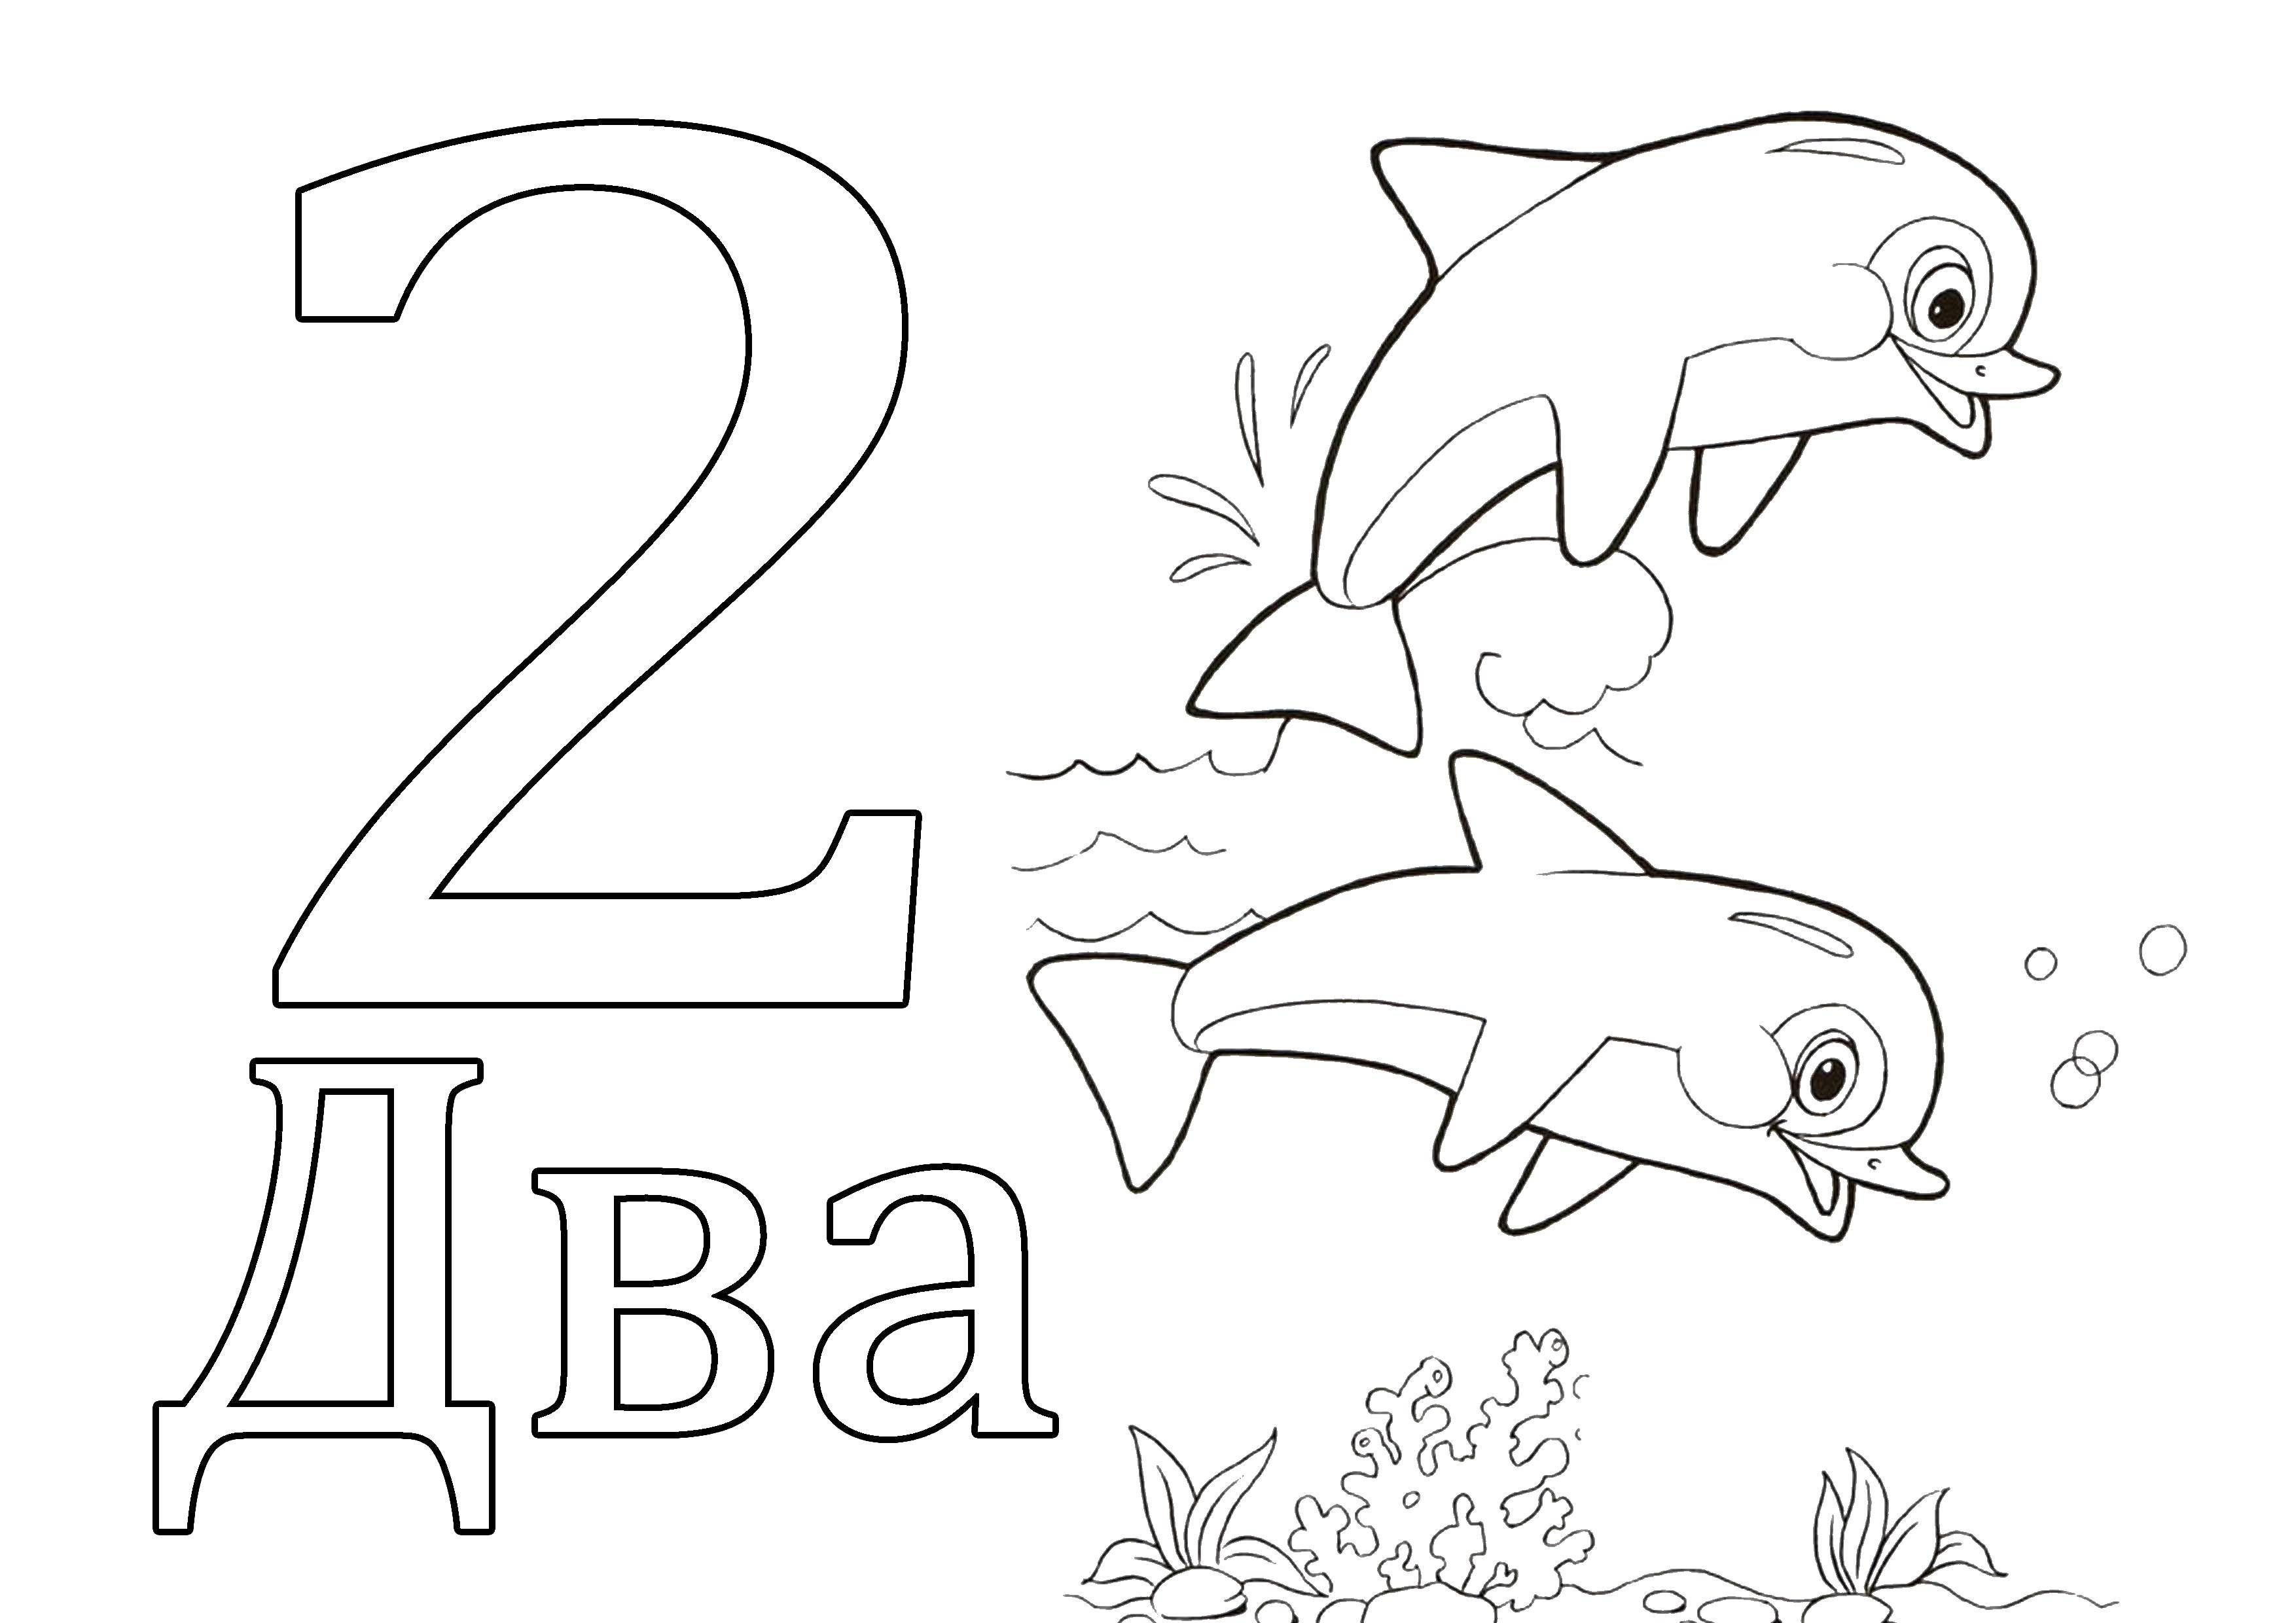 Coloring 2 dolphins. Category coloring figures. Tags:  2, two, dolphins.